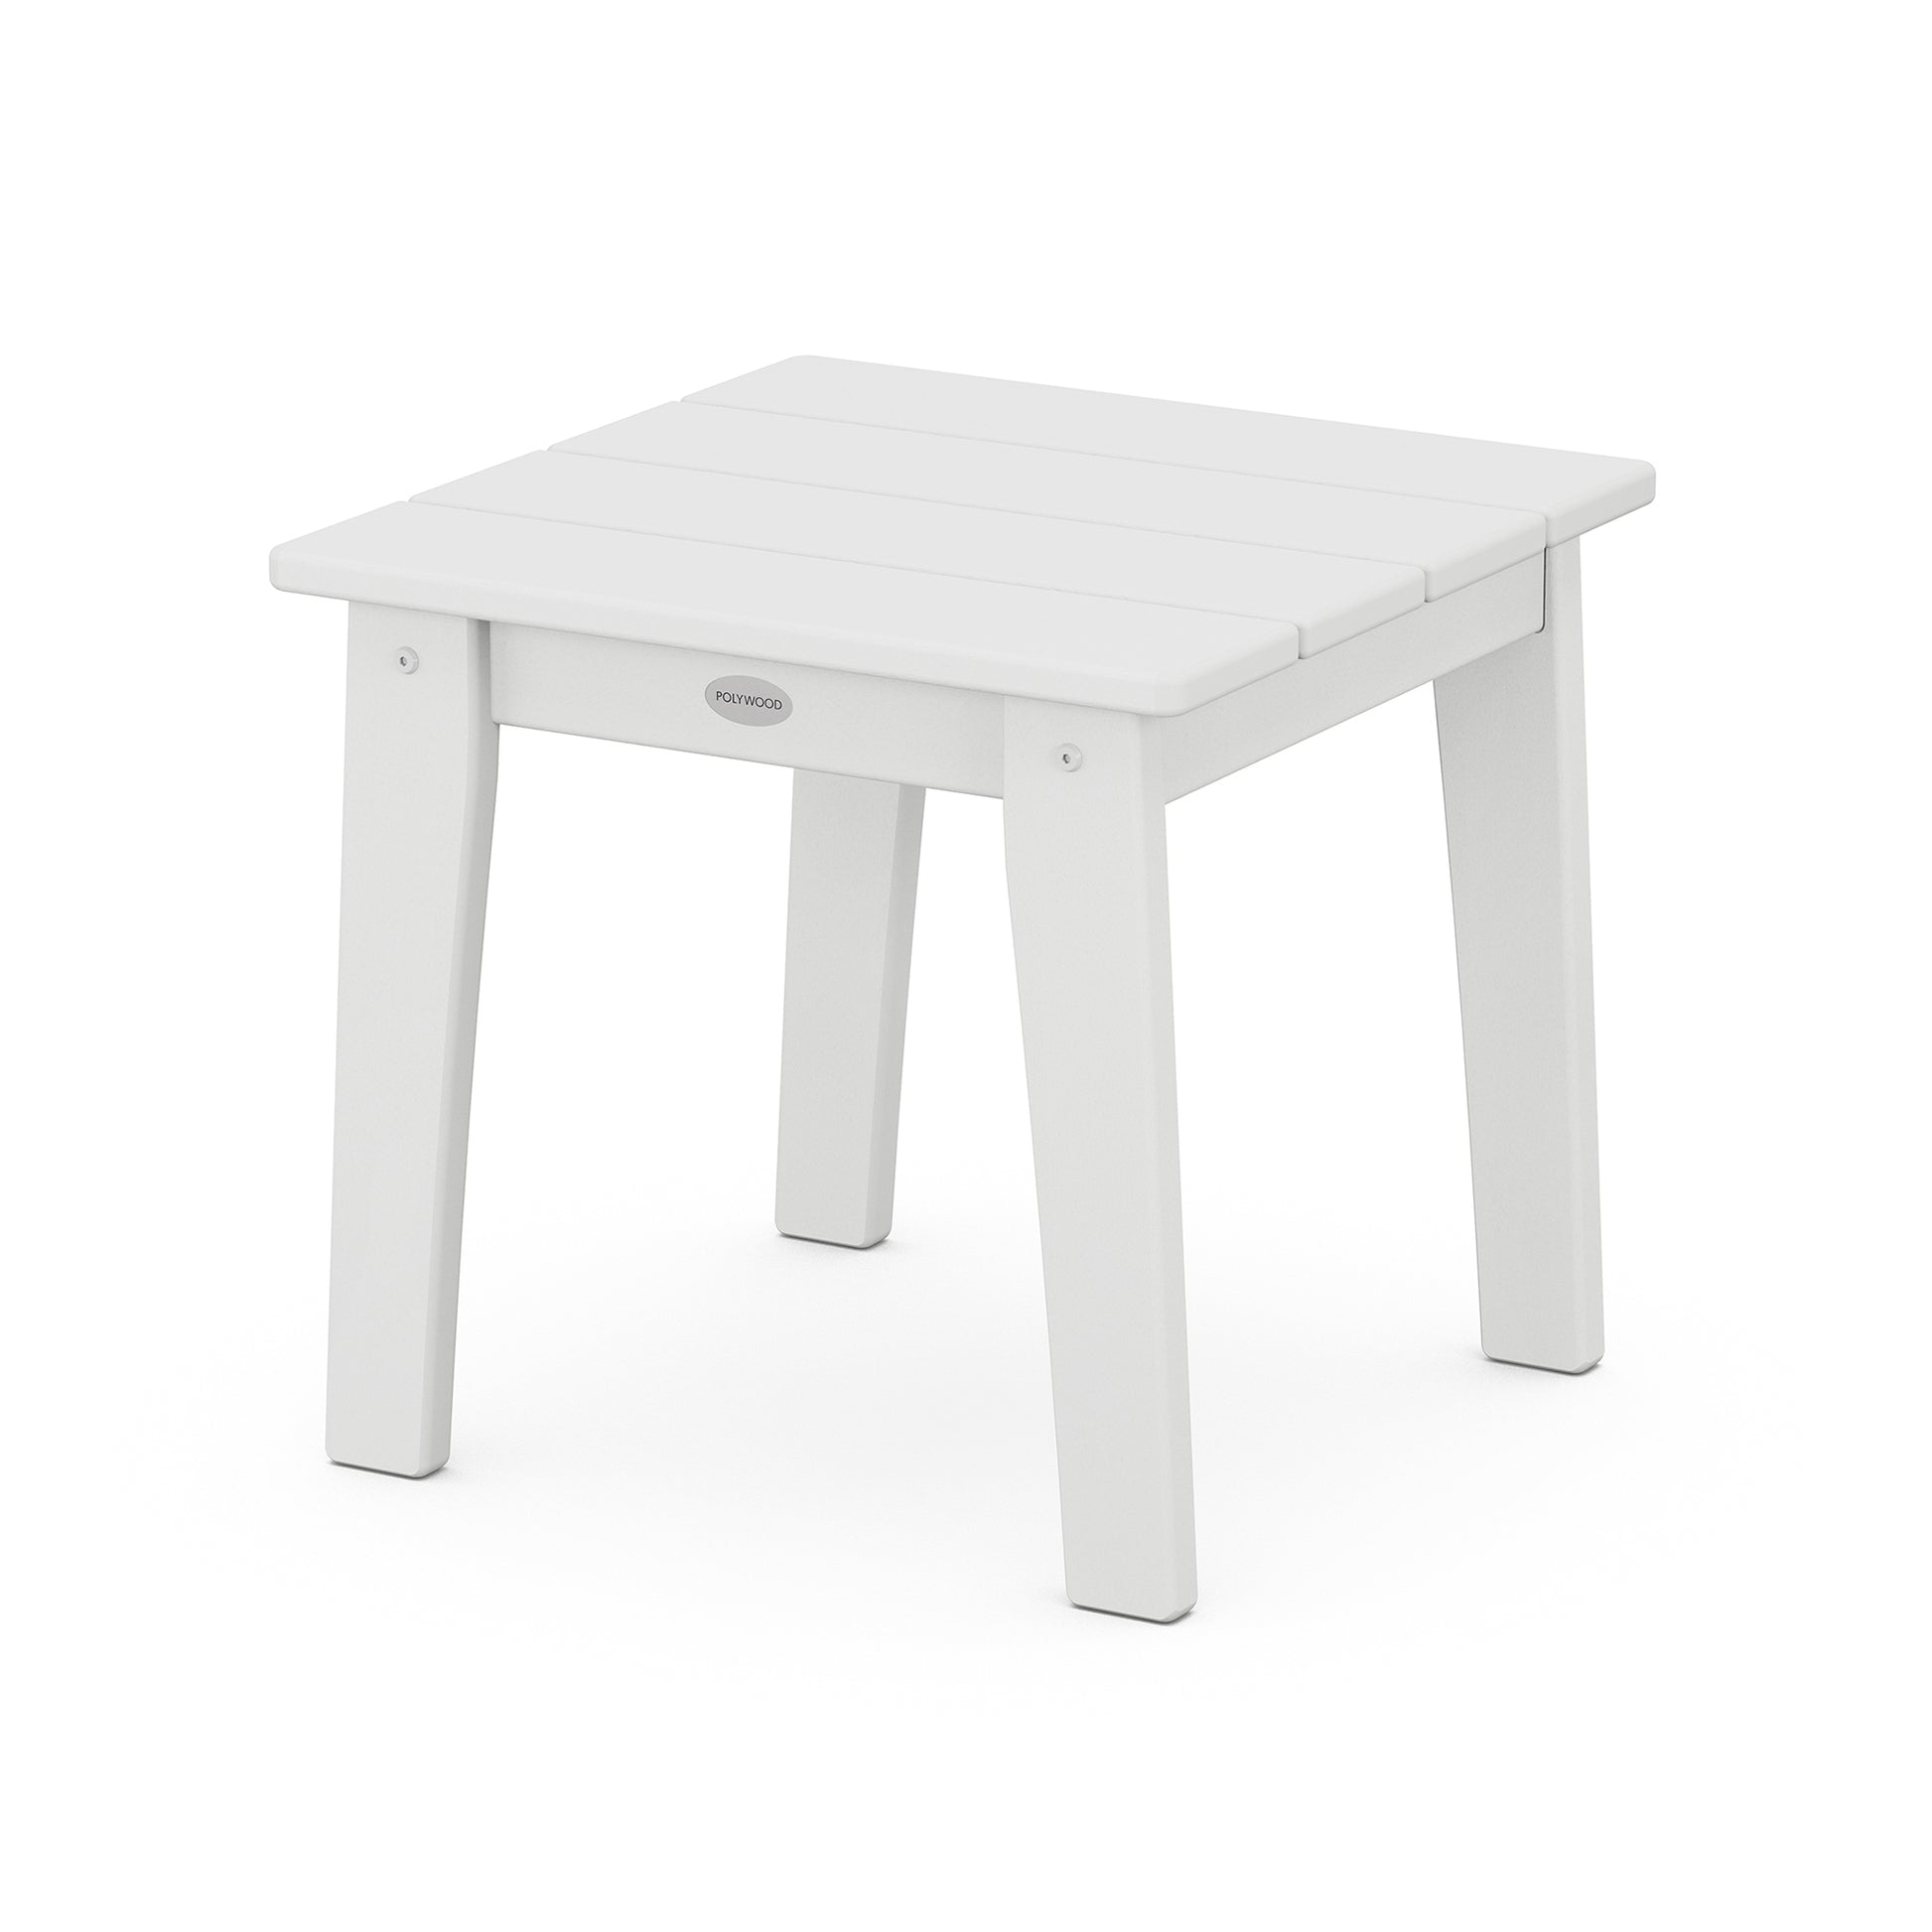 A white POLYWOOD Lakeside 18" End Table with short legs and a brand logo, isolated on a white background.